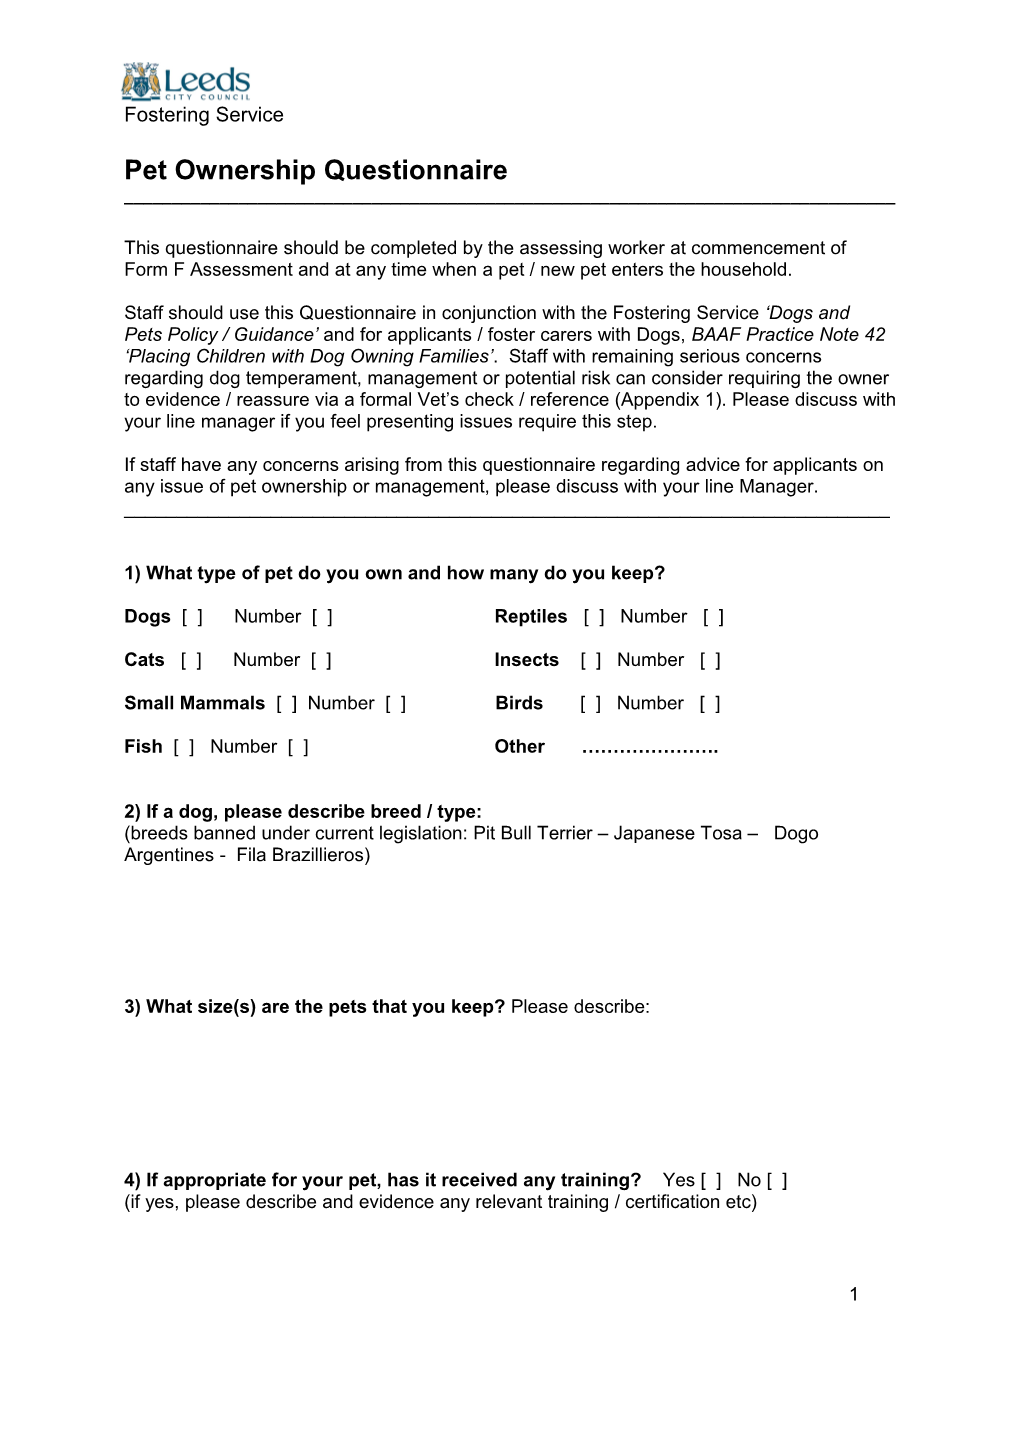 This Questionnaire Should Be Completed by the Assessing Worker at Commencement Of